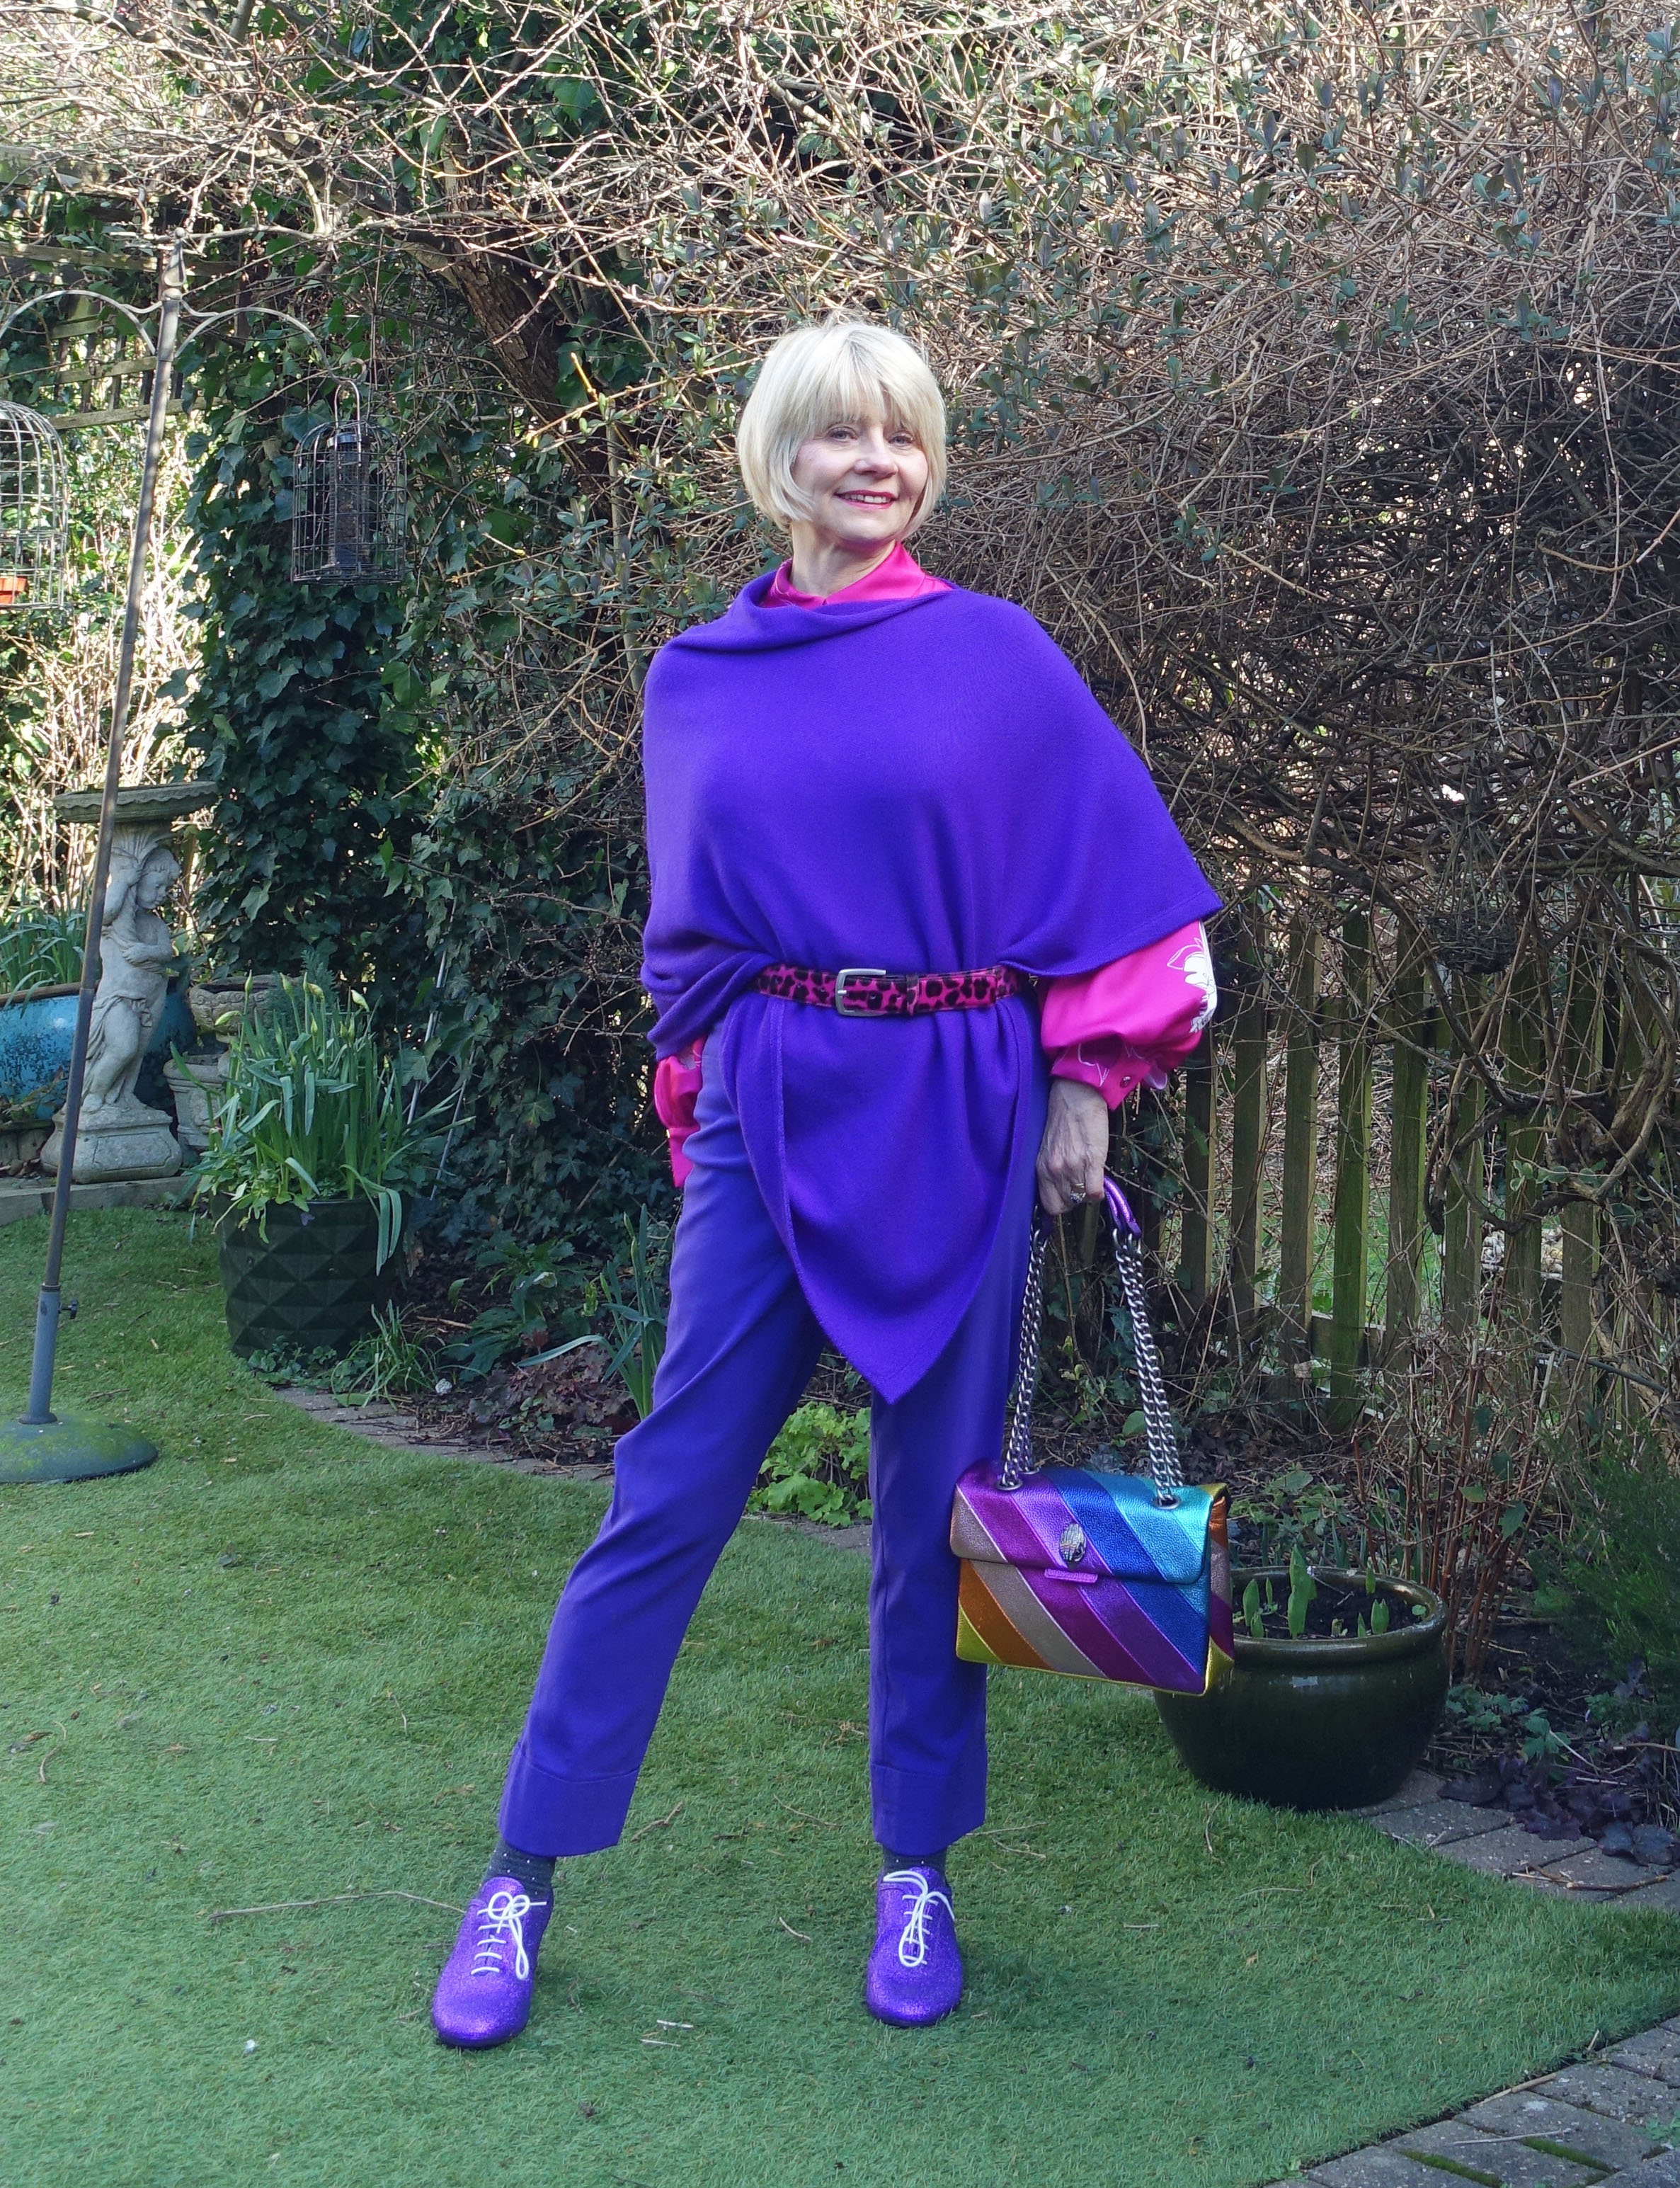 Gail Hanlon belts a purple poncho and styles it with a rainbow bag and bright pink blouse